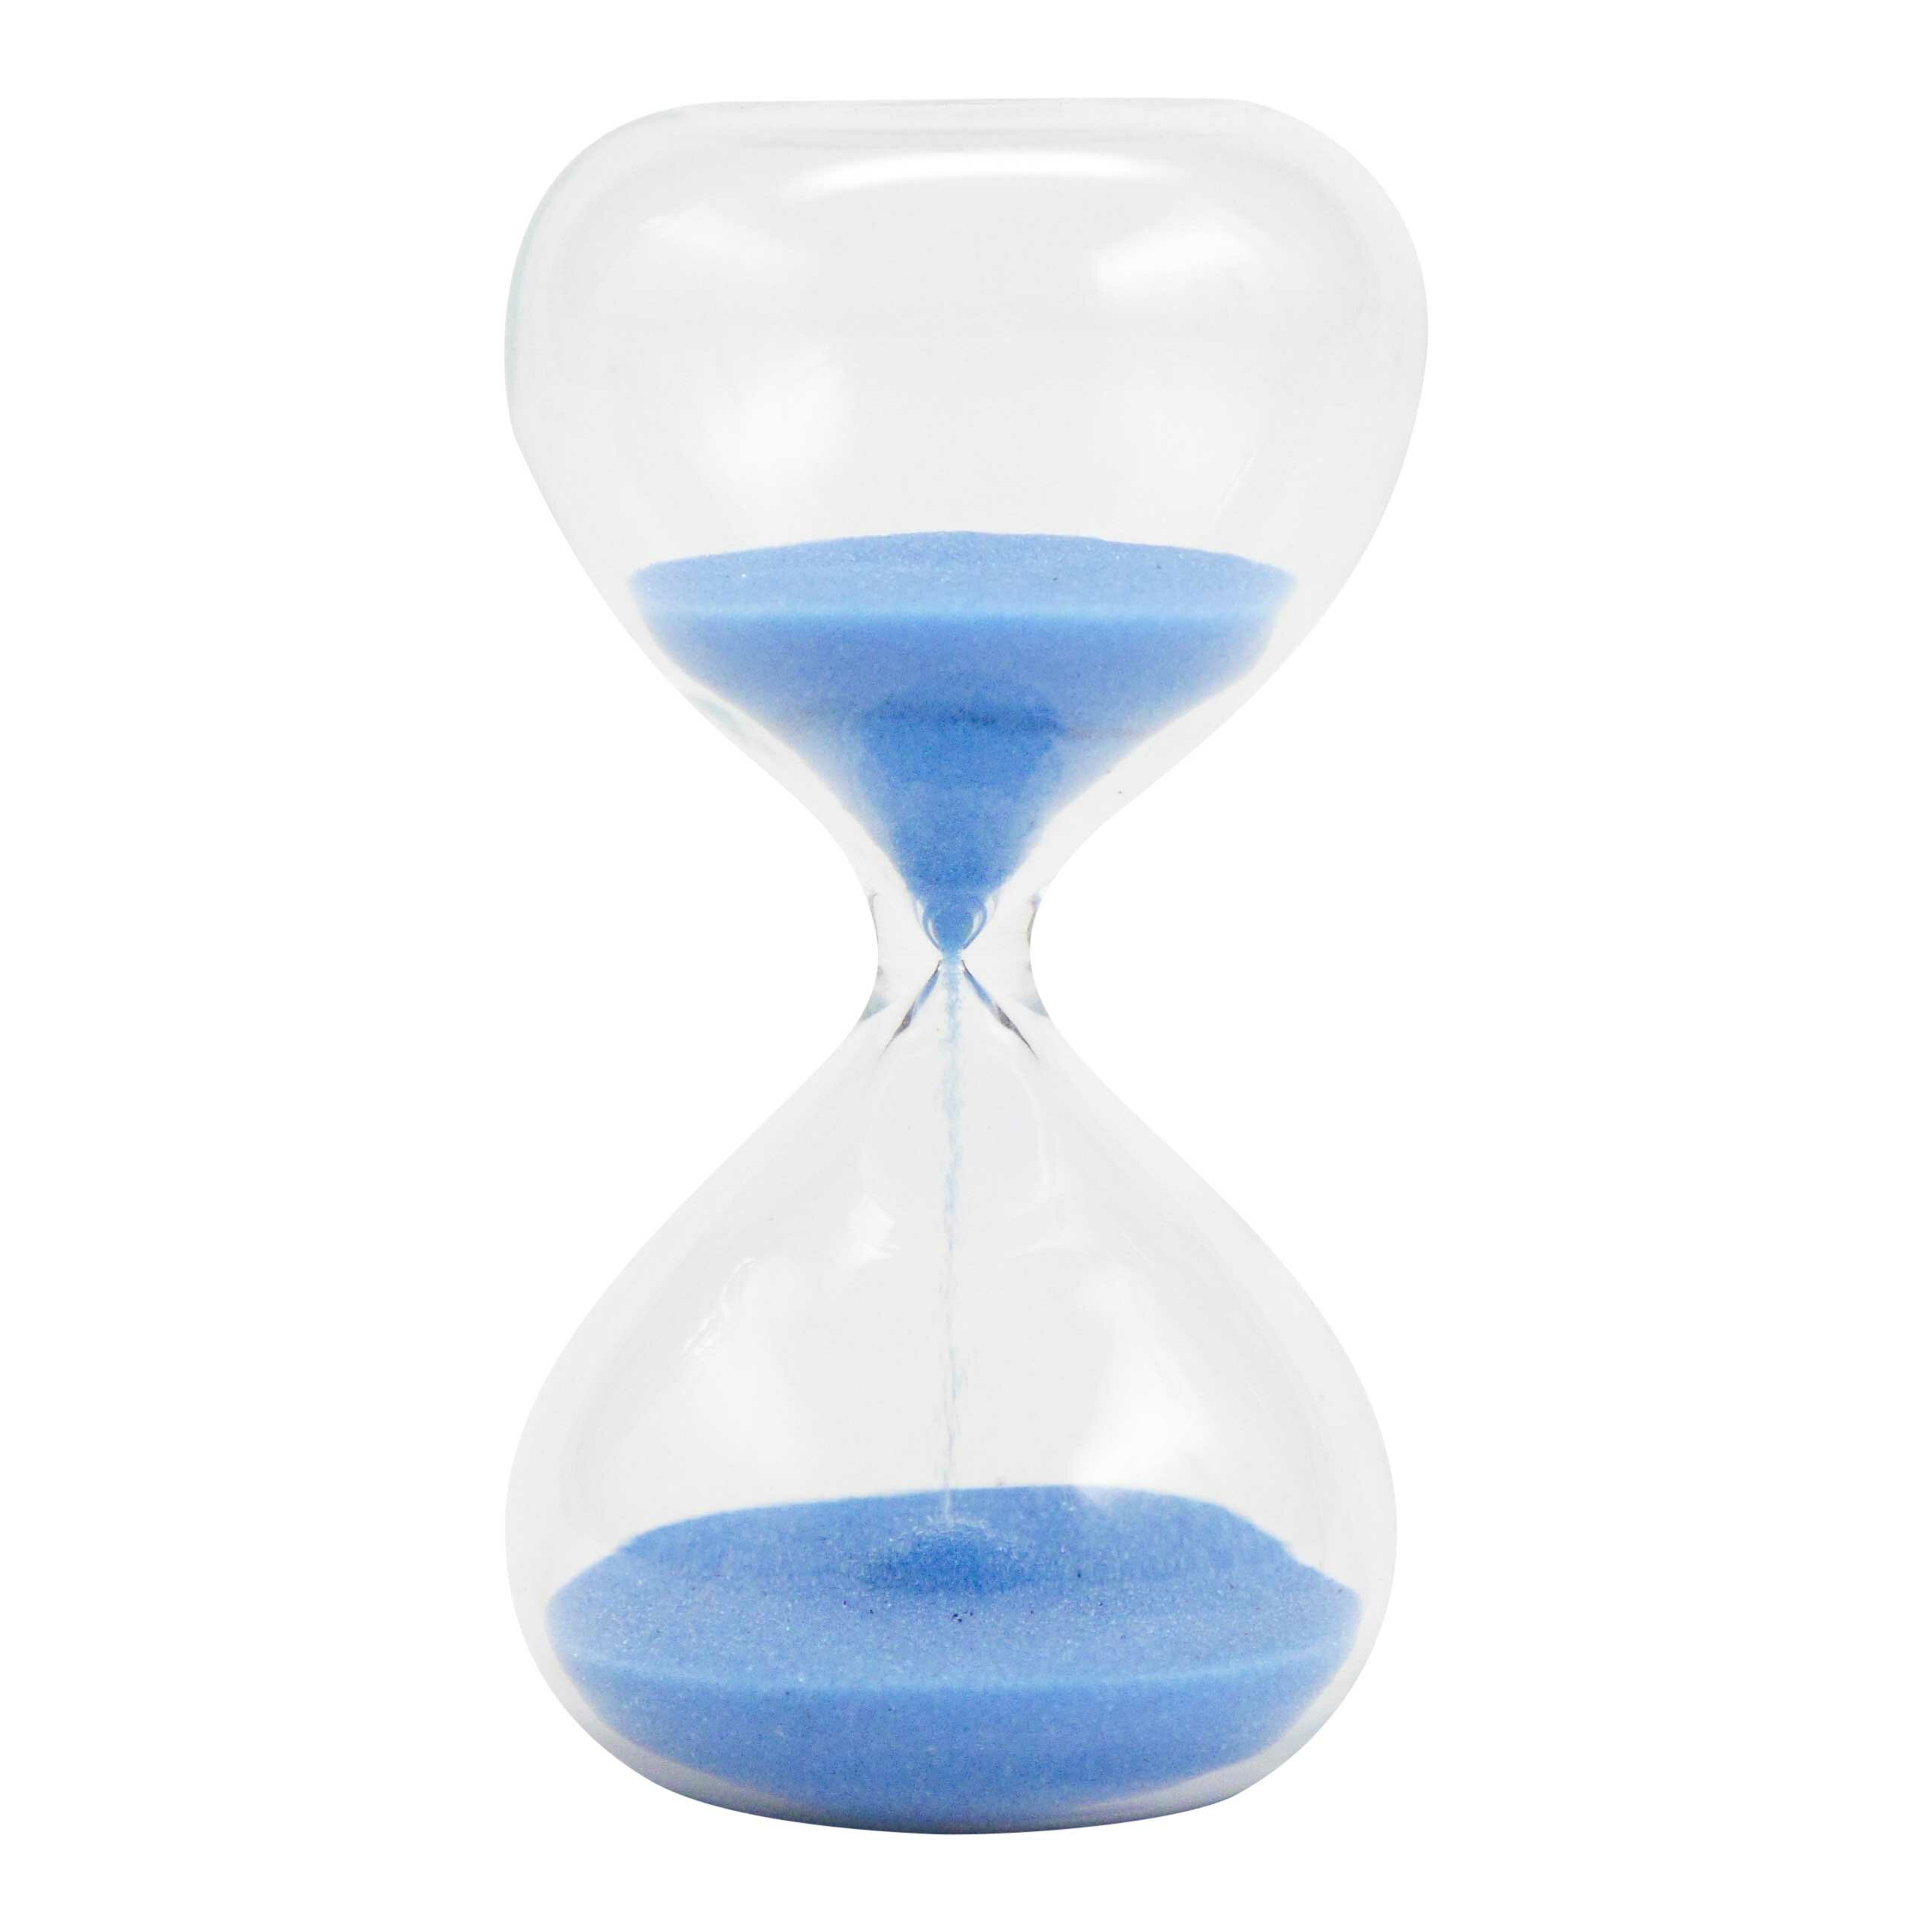 10 minute hourglass sand timer